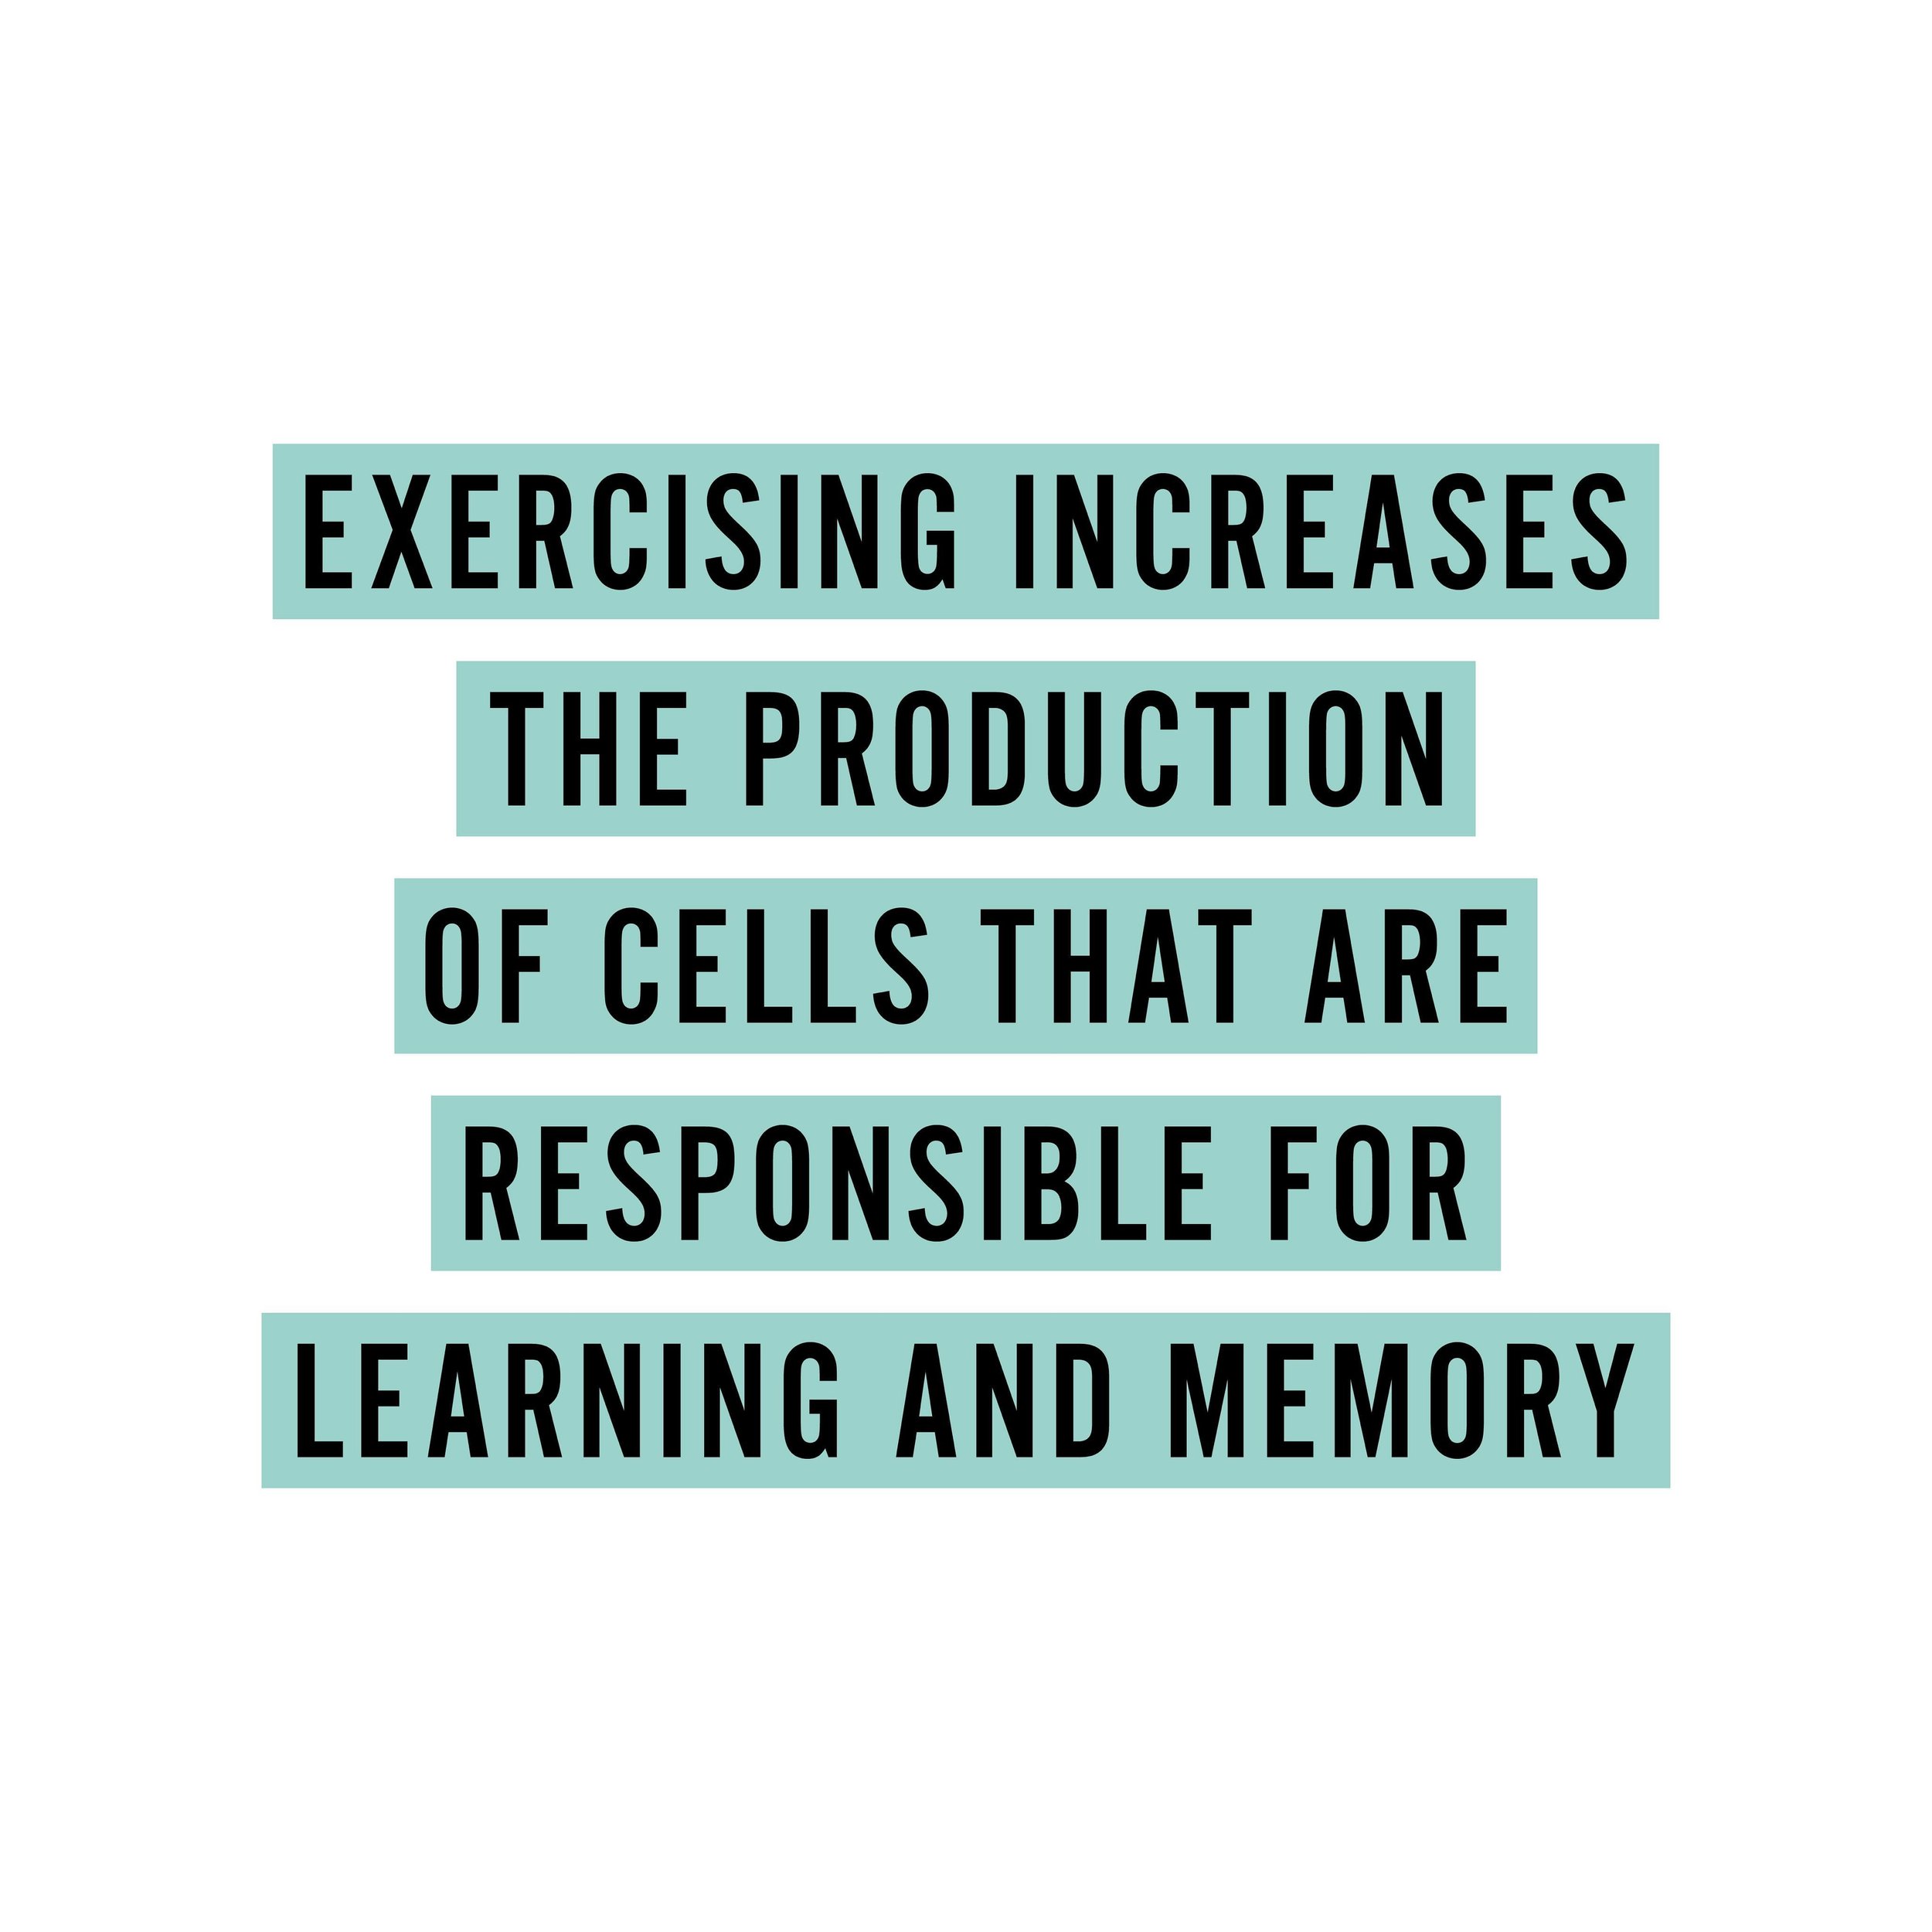 There are so many benefits to exercise! 💪 One being that it can boost memory and thinking skills. &ldquo;There&rsquo;s a lot of science behind this,&rdquo; says Dr. Scott McGinnis, an instructor in neurology at Harvard Medical School. 

In a study d